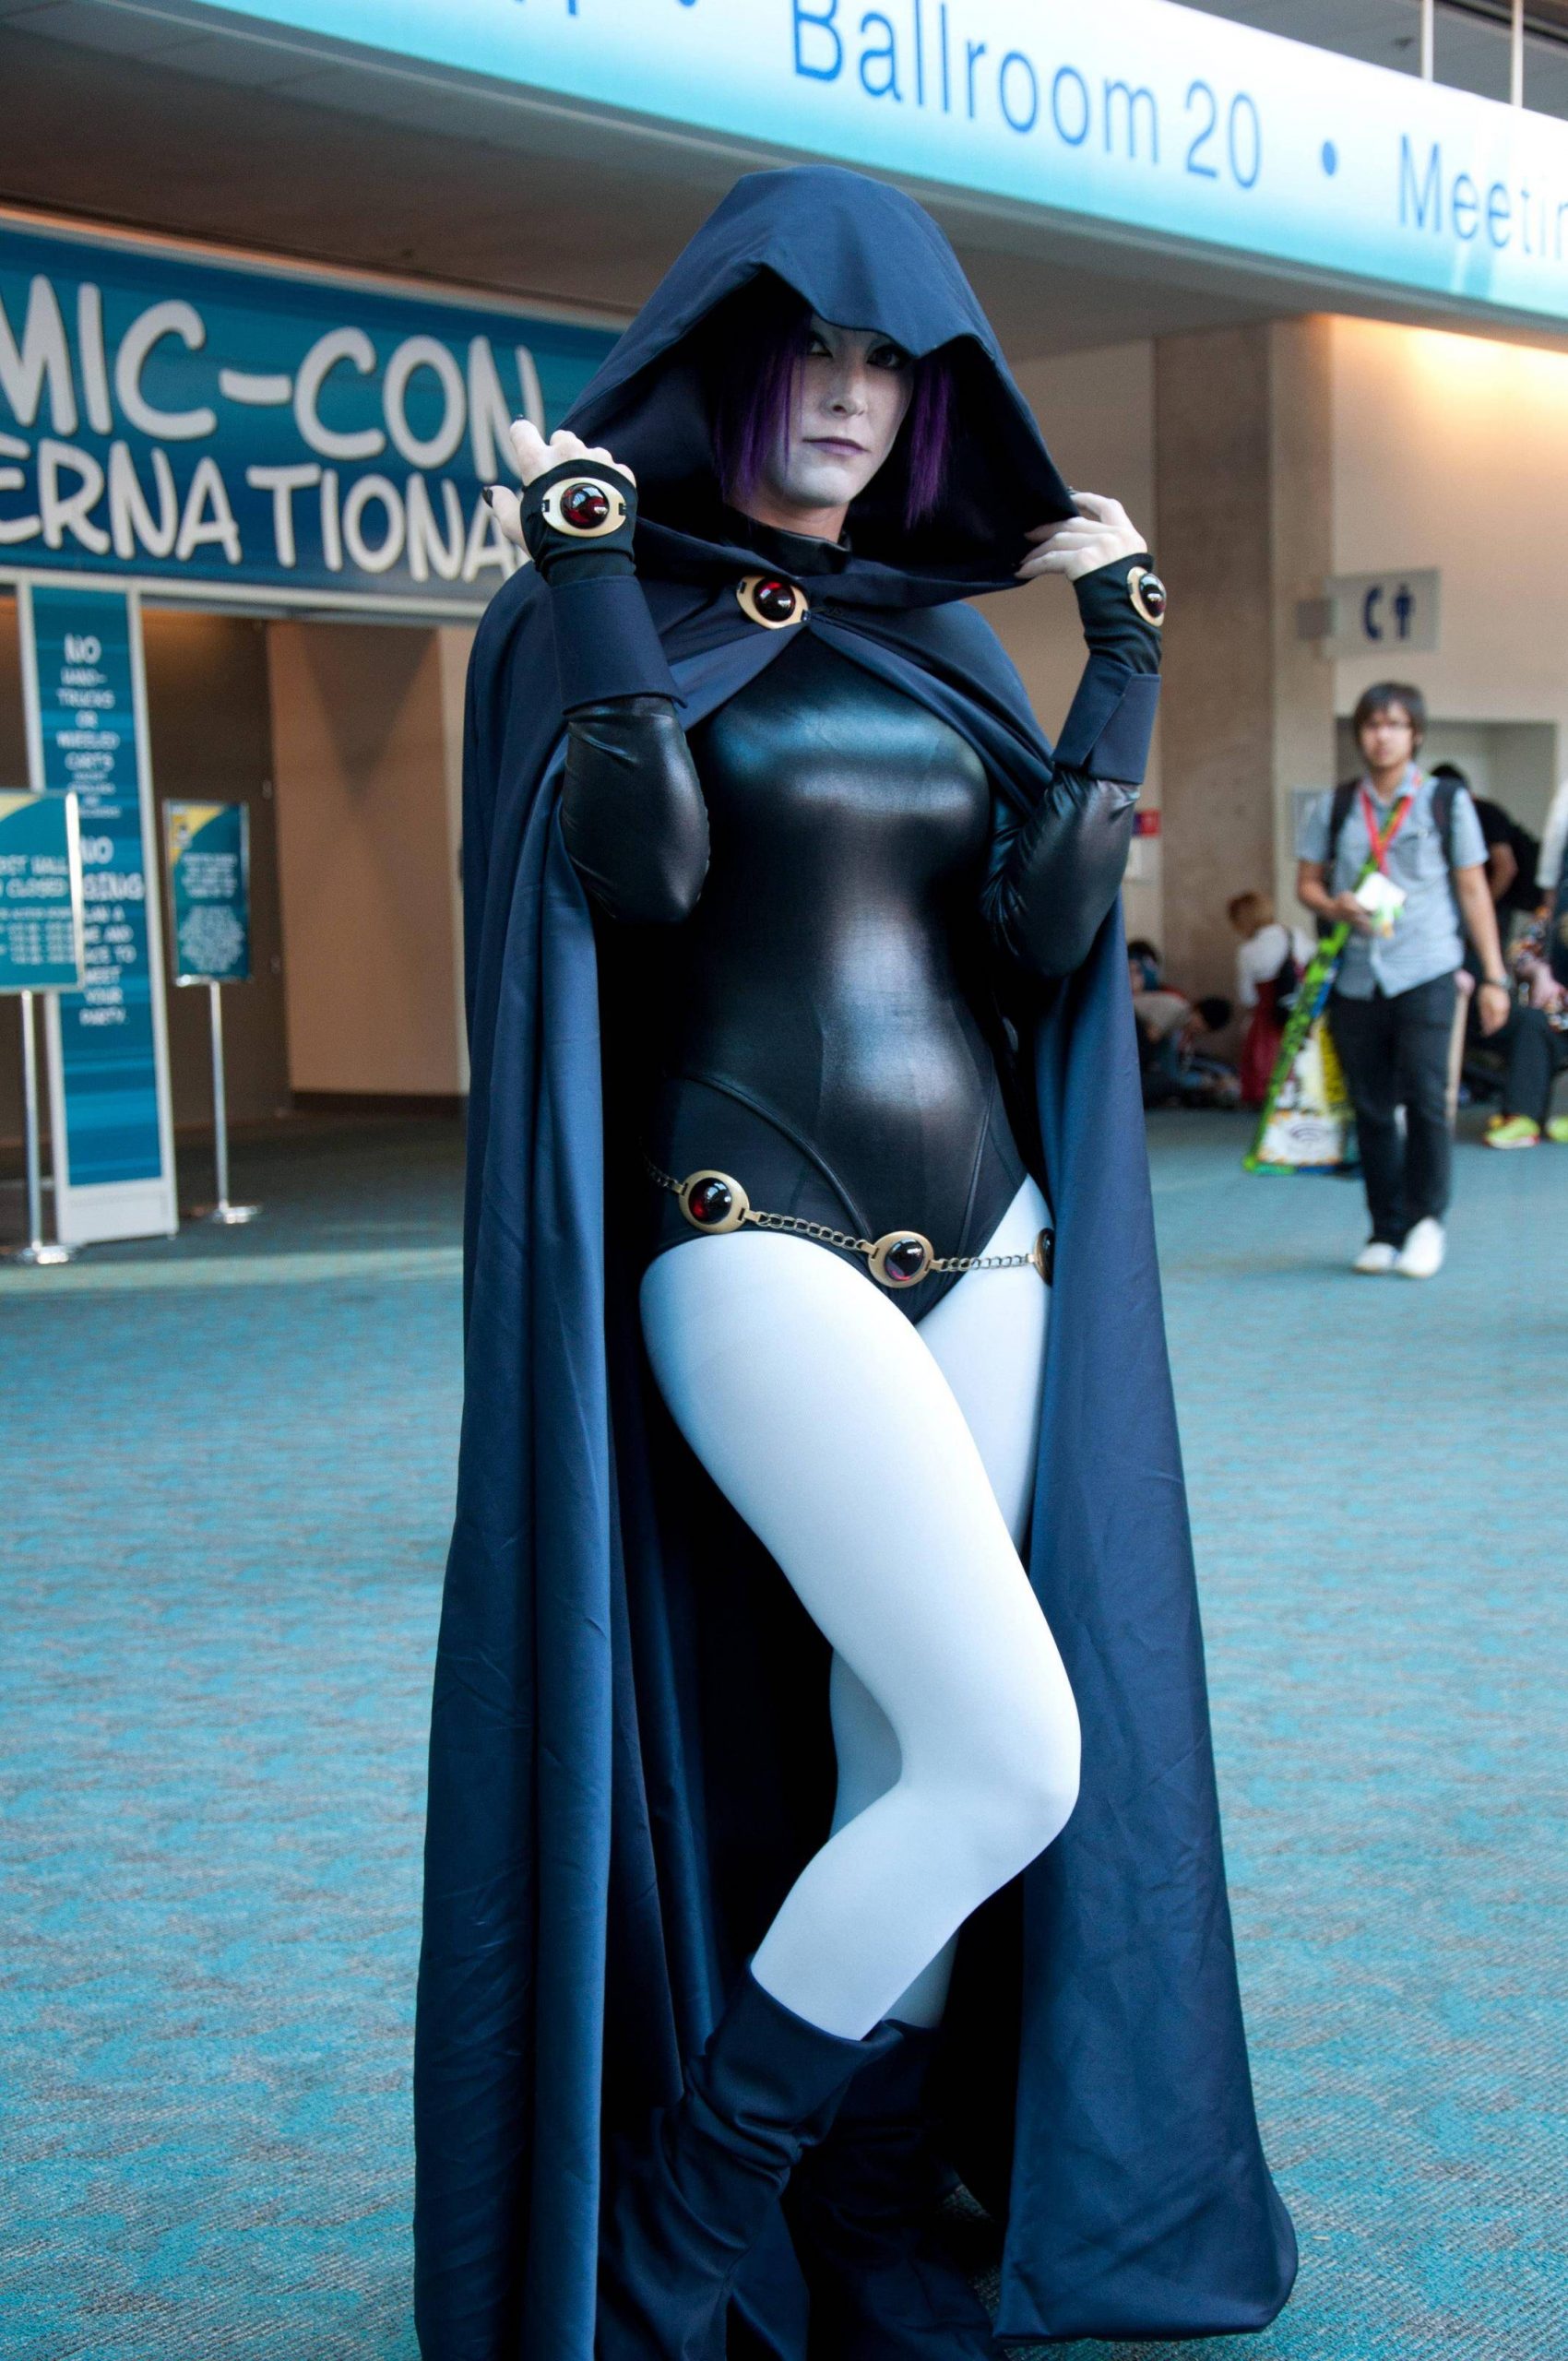 50+ Hot Pictures Of Raven From Teen Titans, DC Comics. 27